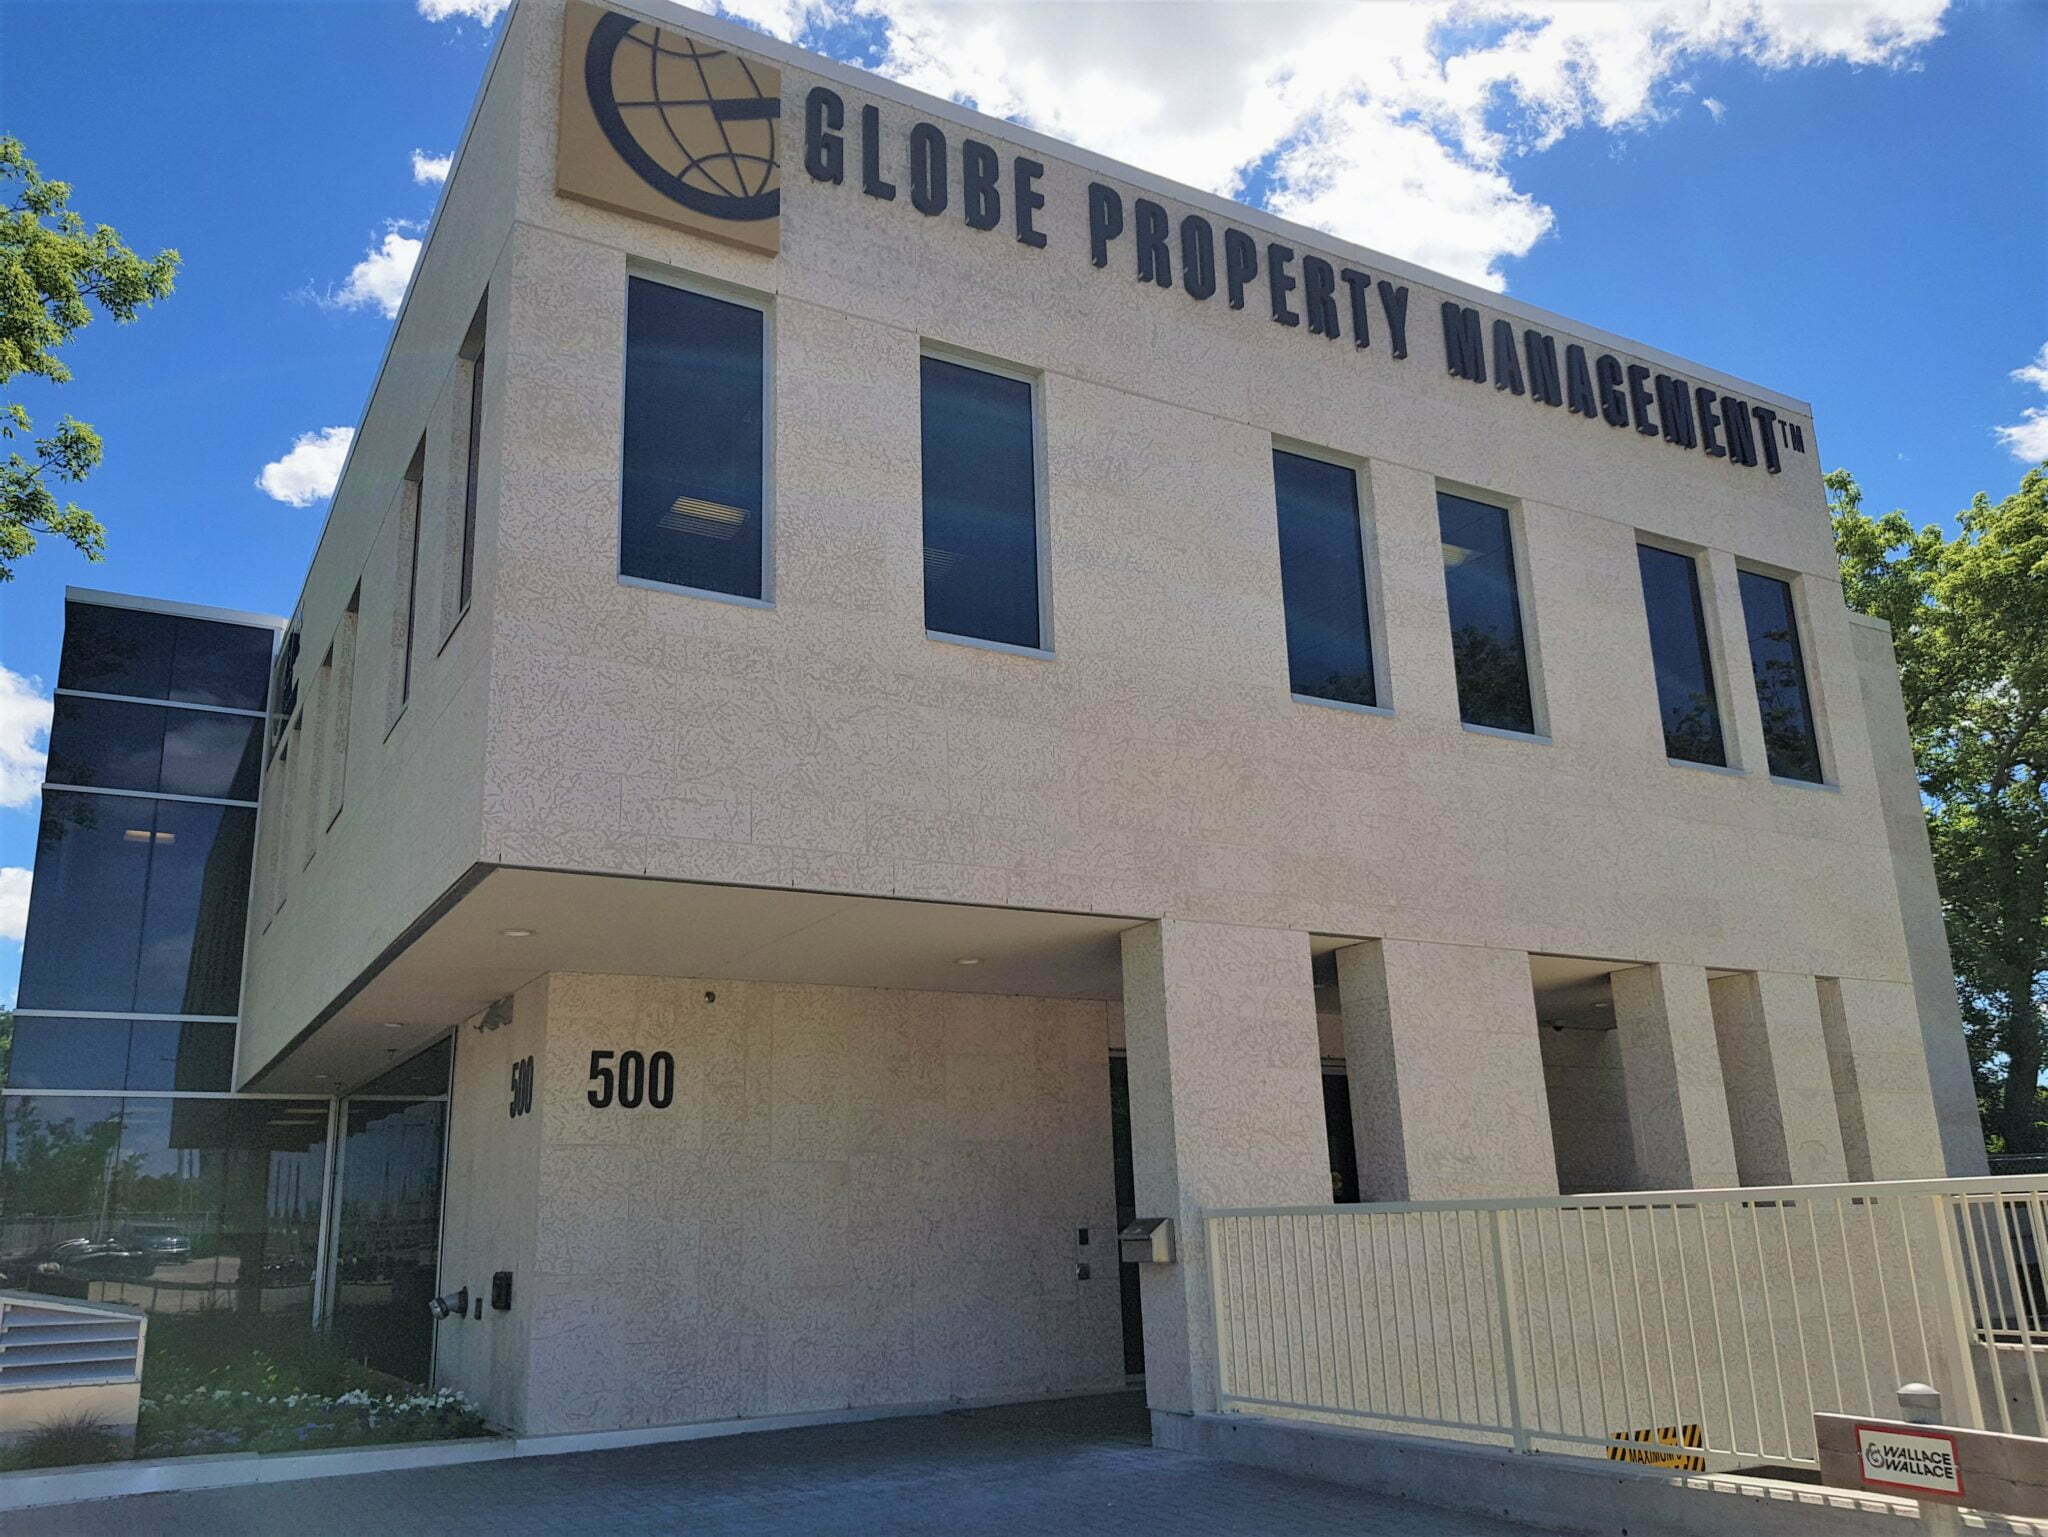 exterior of Globe Property Management head office